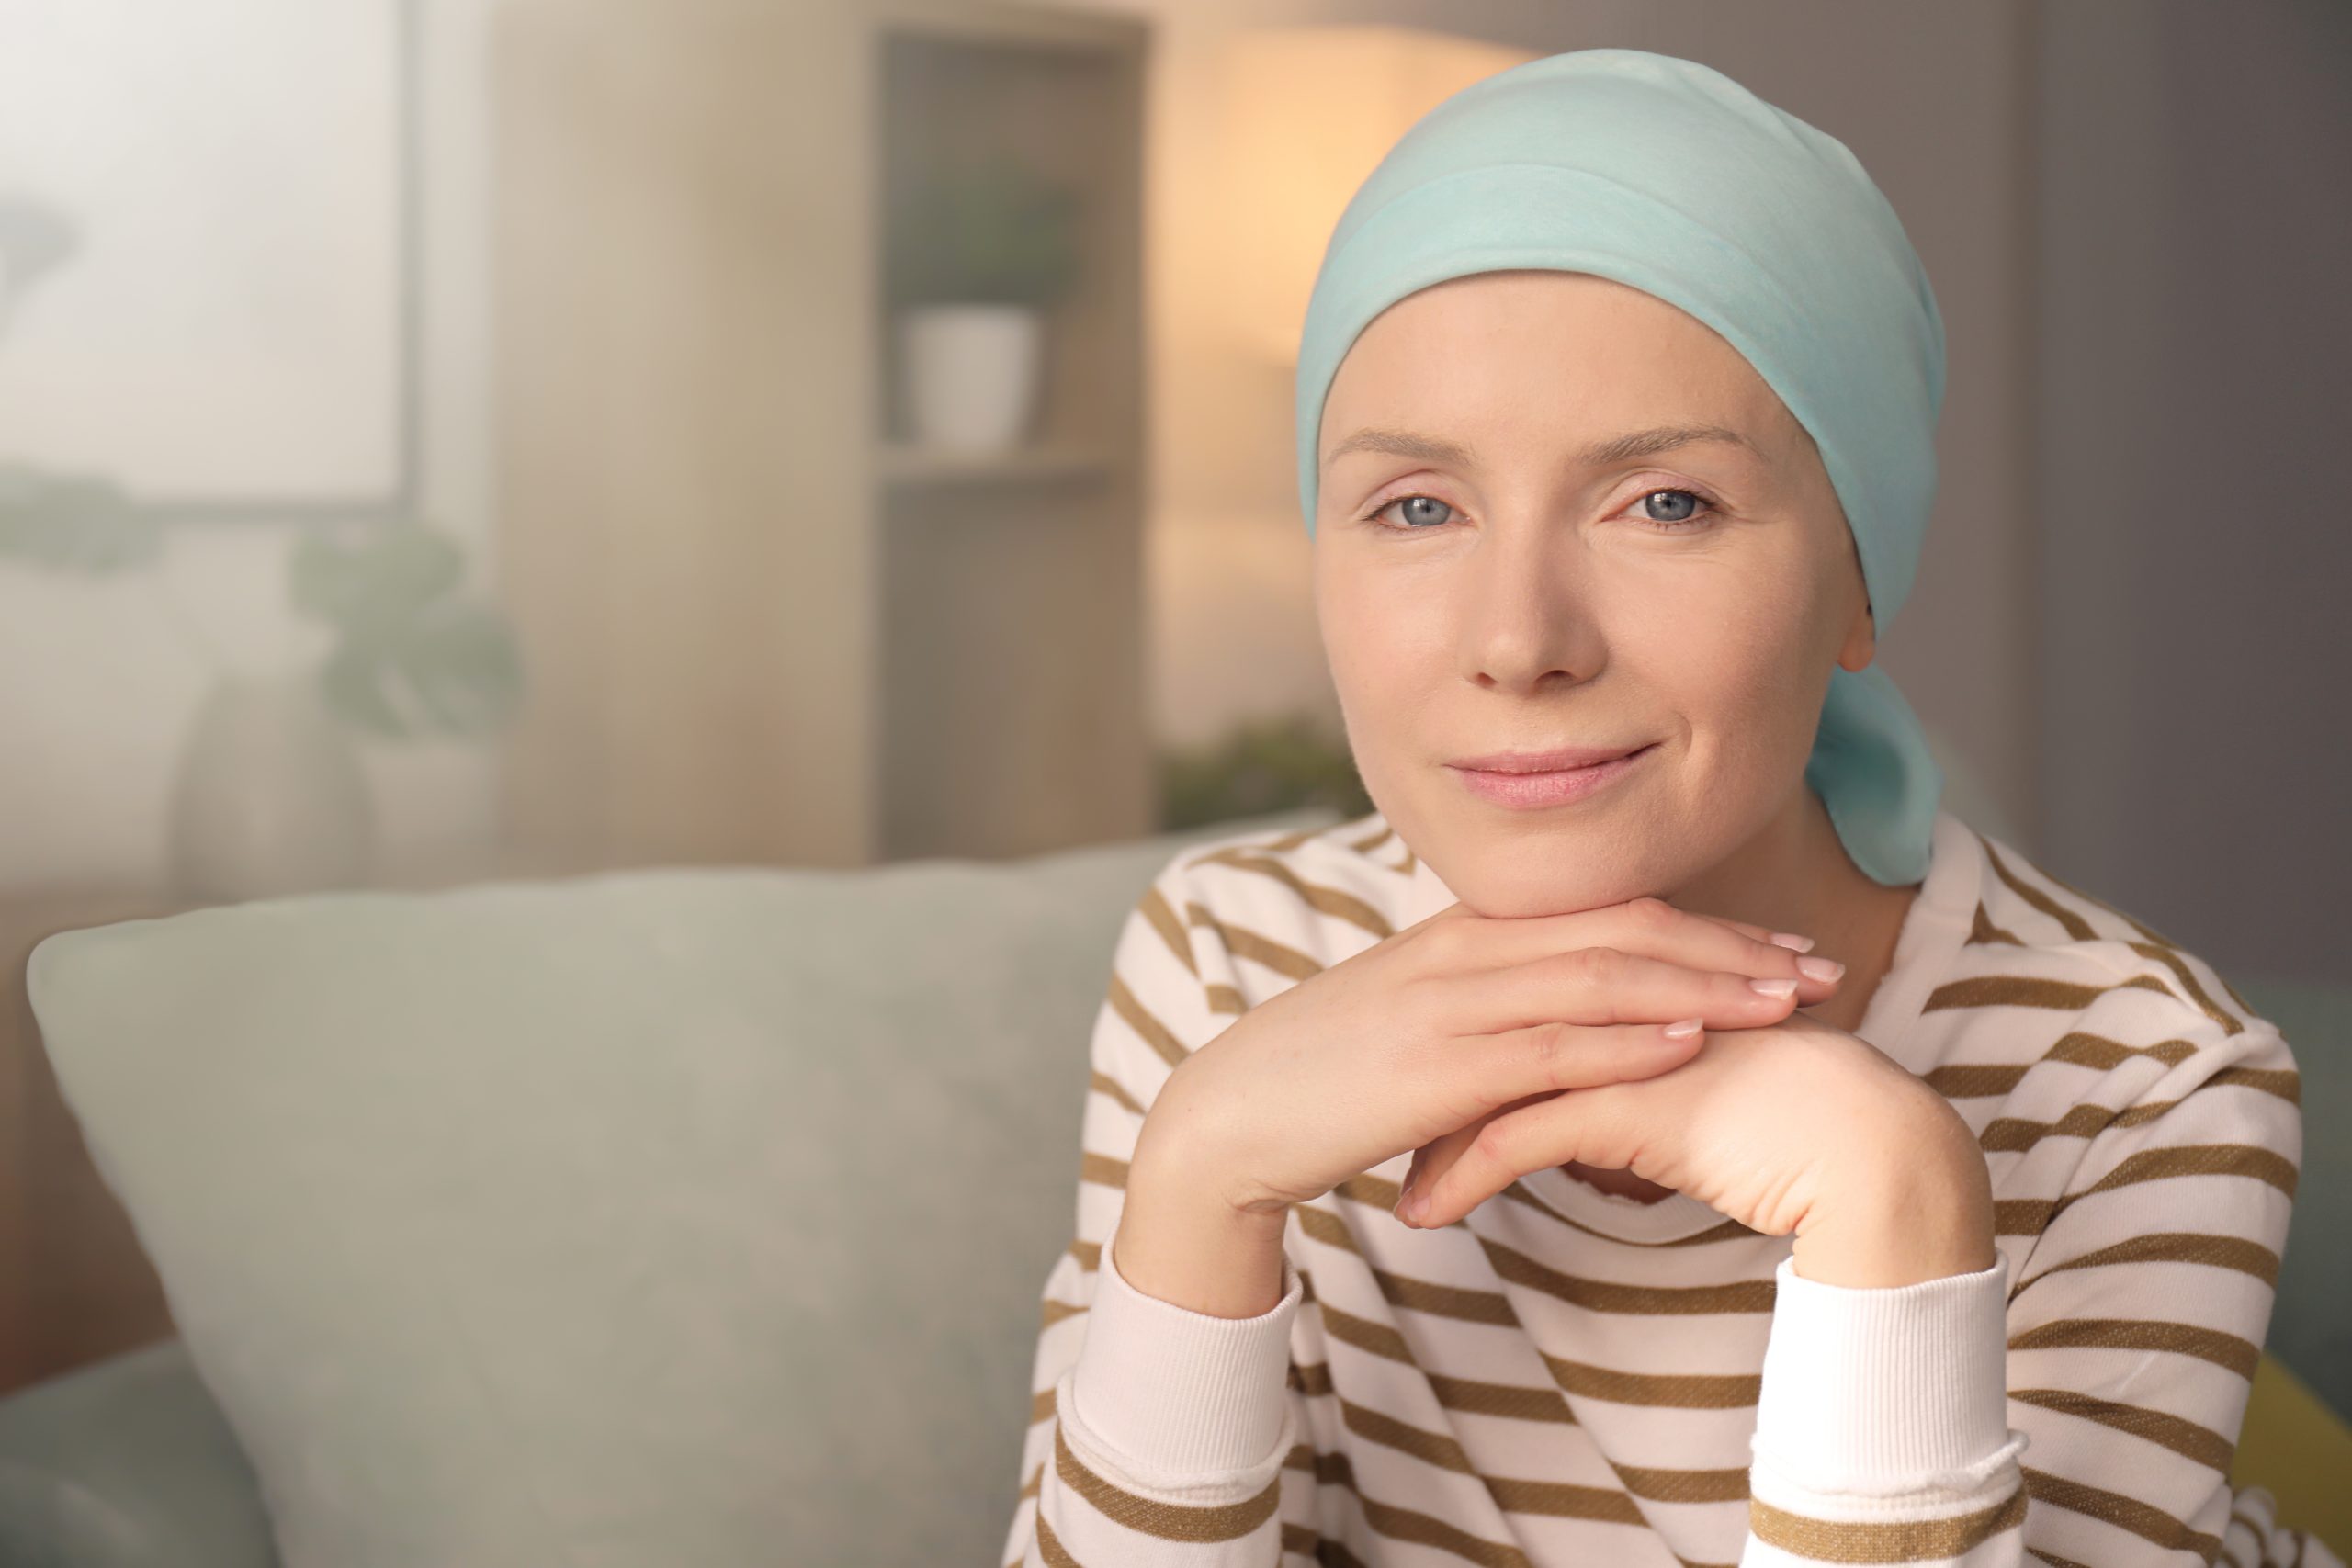 Lady being treated for cancer wearing scarf on her head